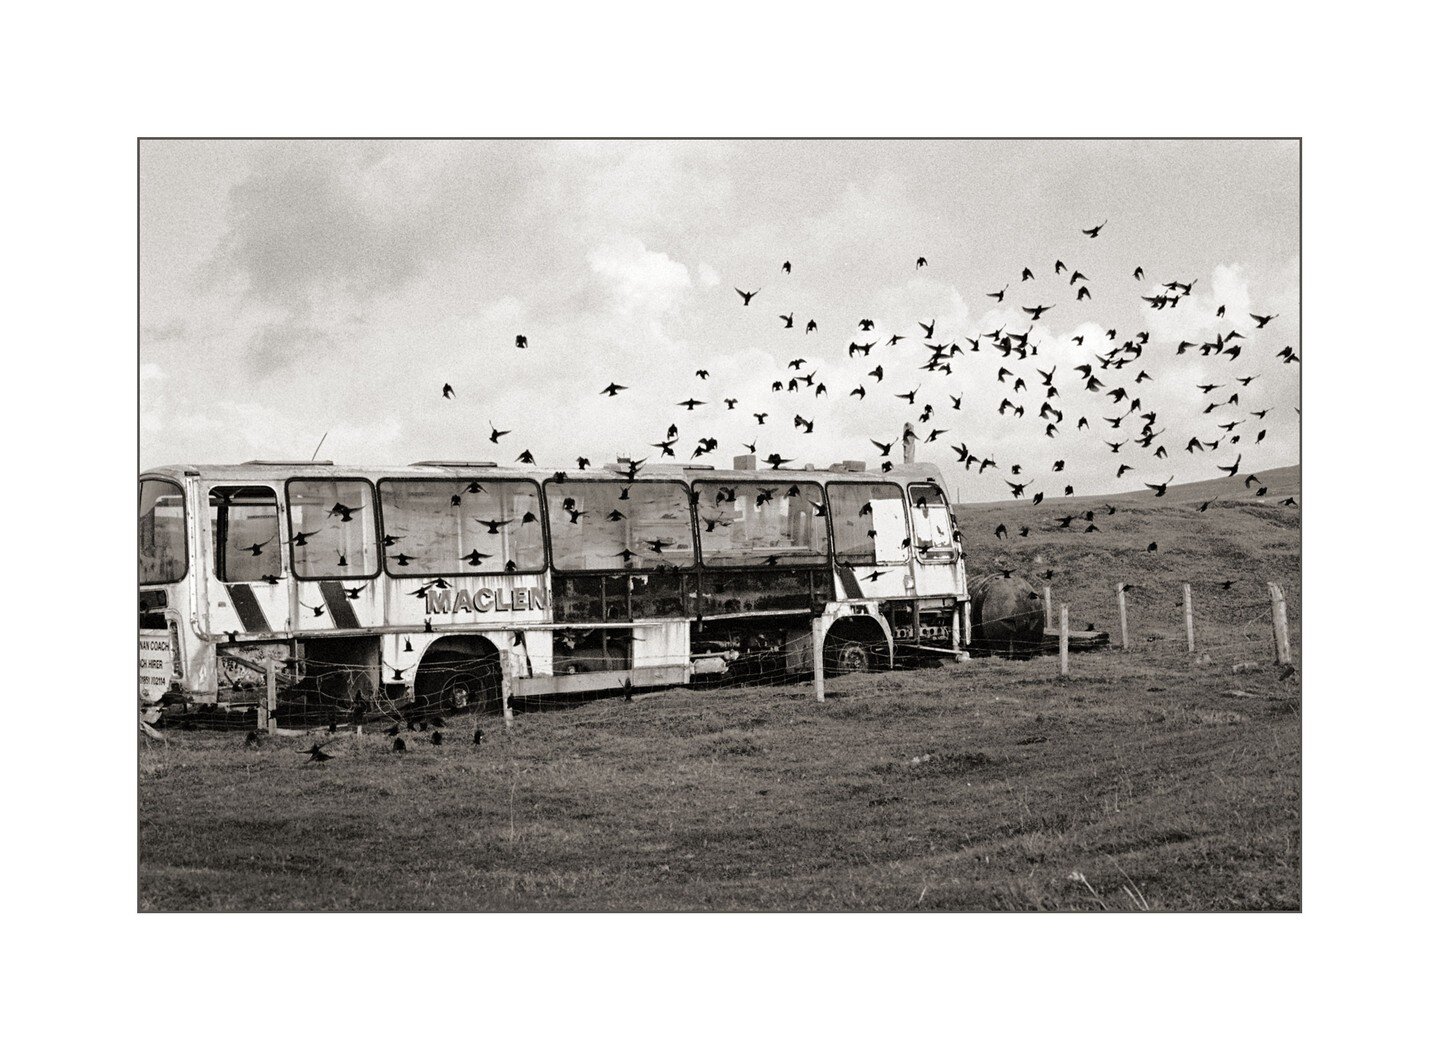 Scout&rsquo;s bus and starlings. Scarista, Isle of Harris. Old bus once used by Boy Scouts as a base for summer camps. #scarista #oldbus #isleofharris #boyscouts #starlings #outerhebrides #nikonfm2n #nikkor50mmf12 #nikkorais #filmslr #kodaktrix #trix